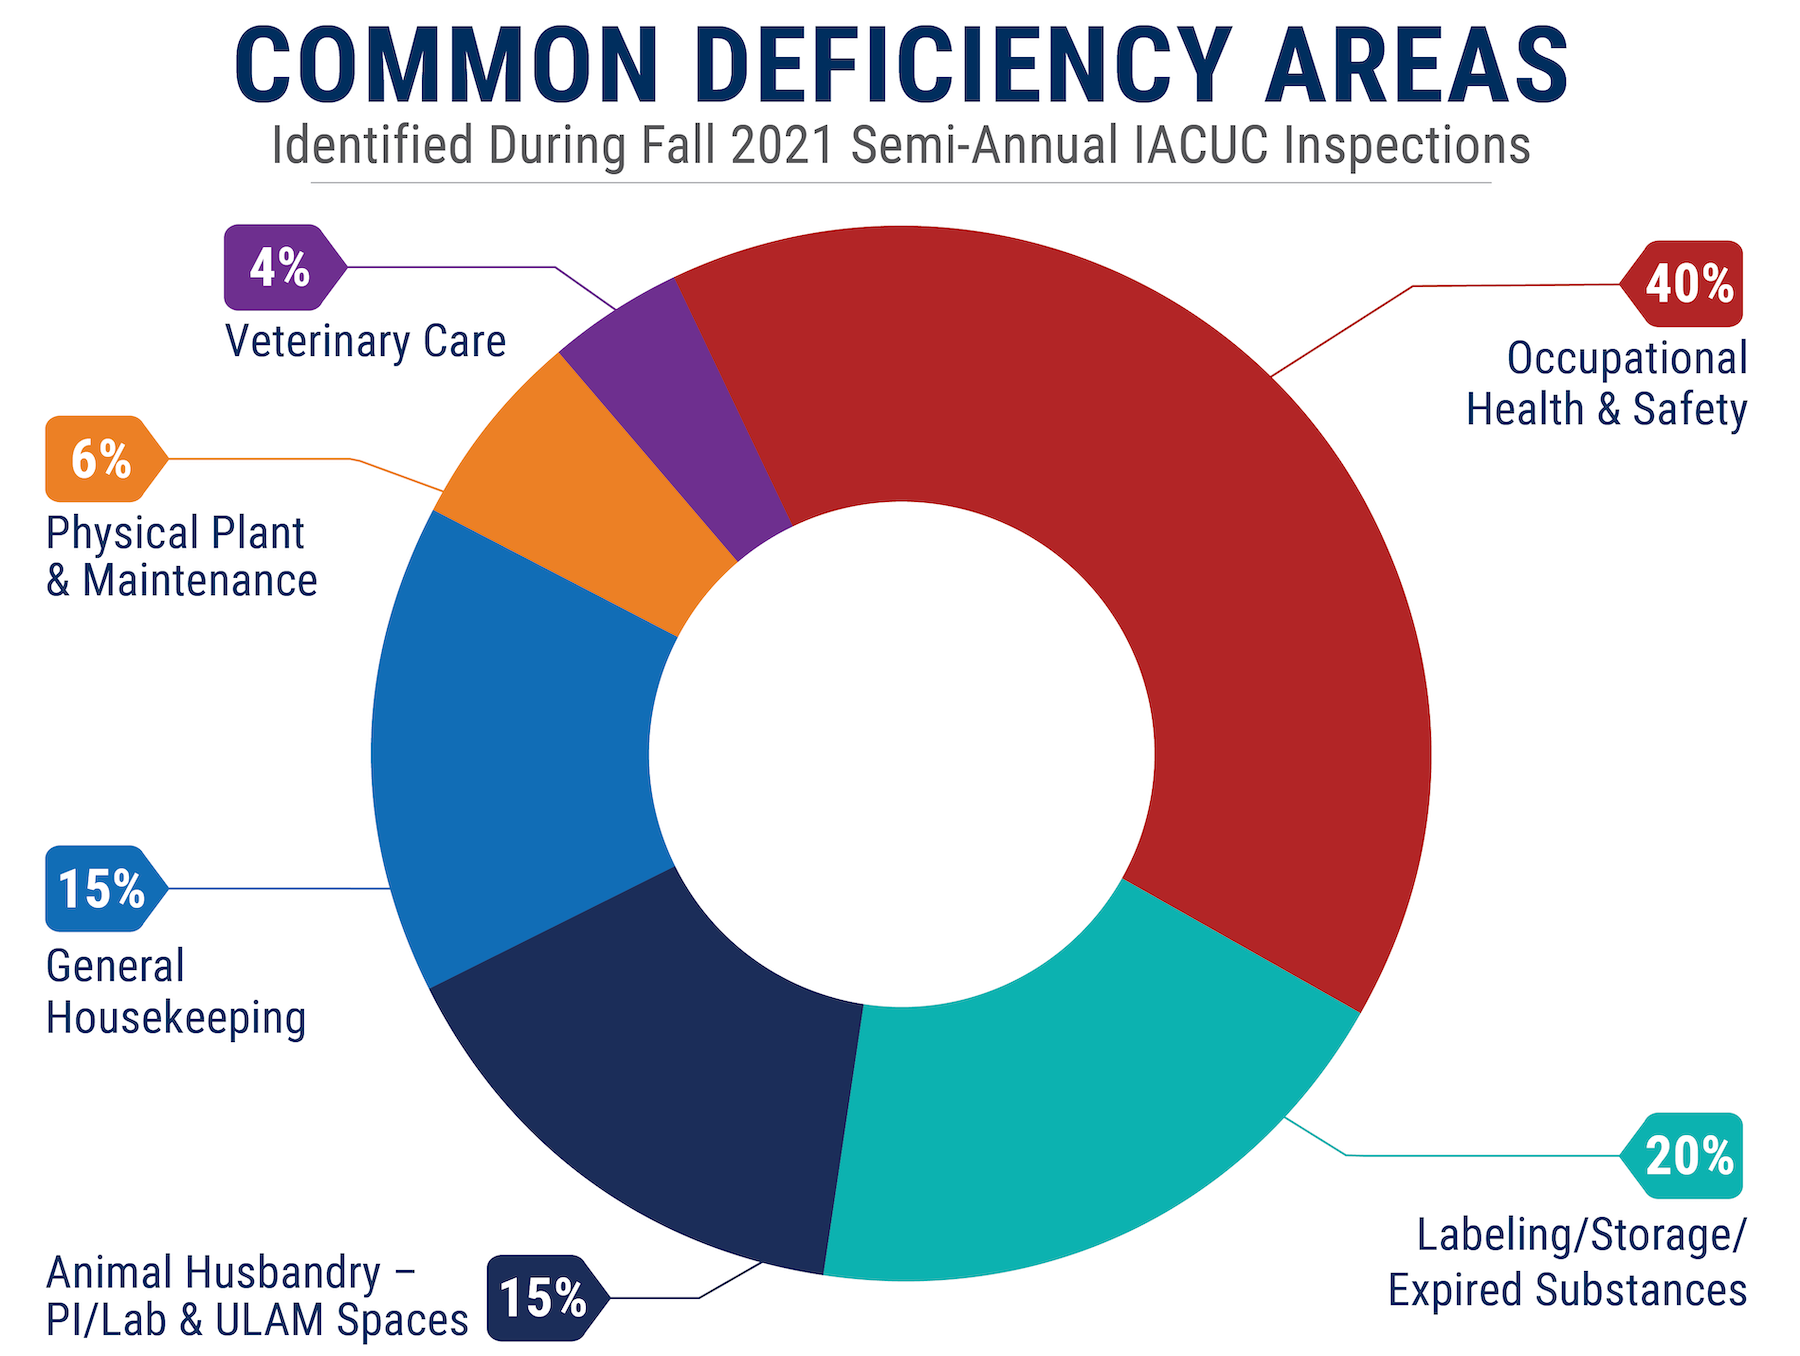 Graph showing common deficiency areas identified during Fall 2021 semi-annual facility inspections